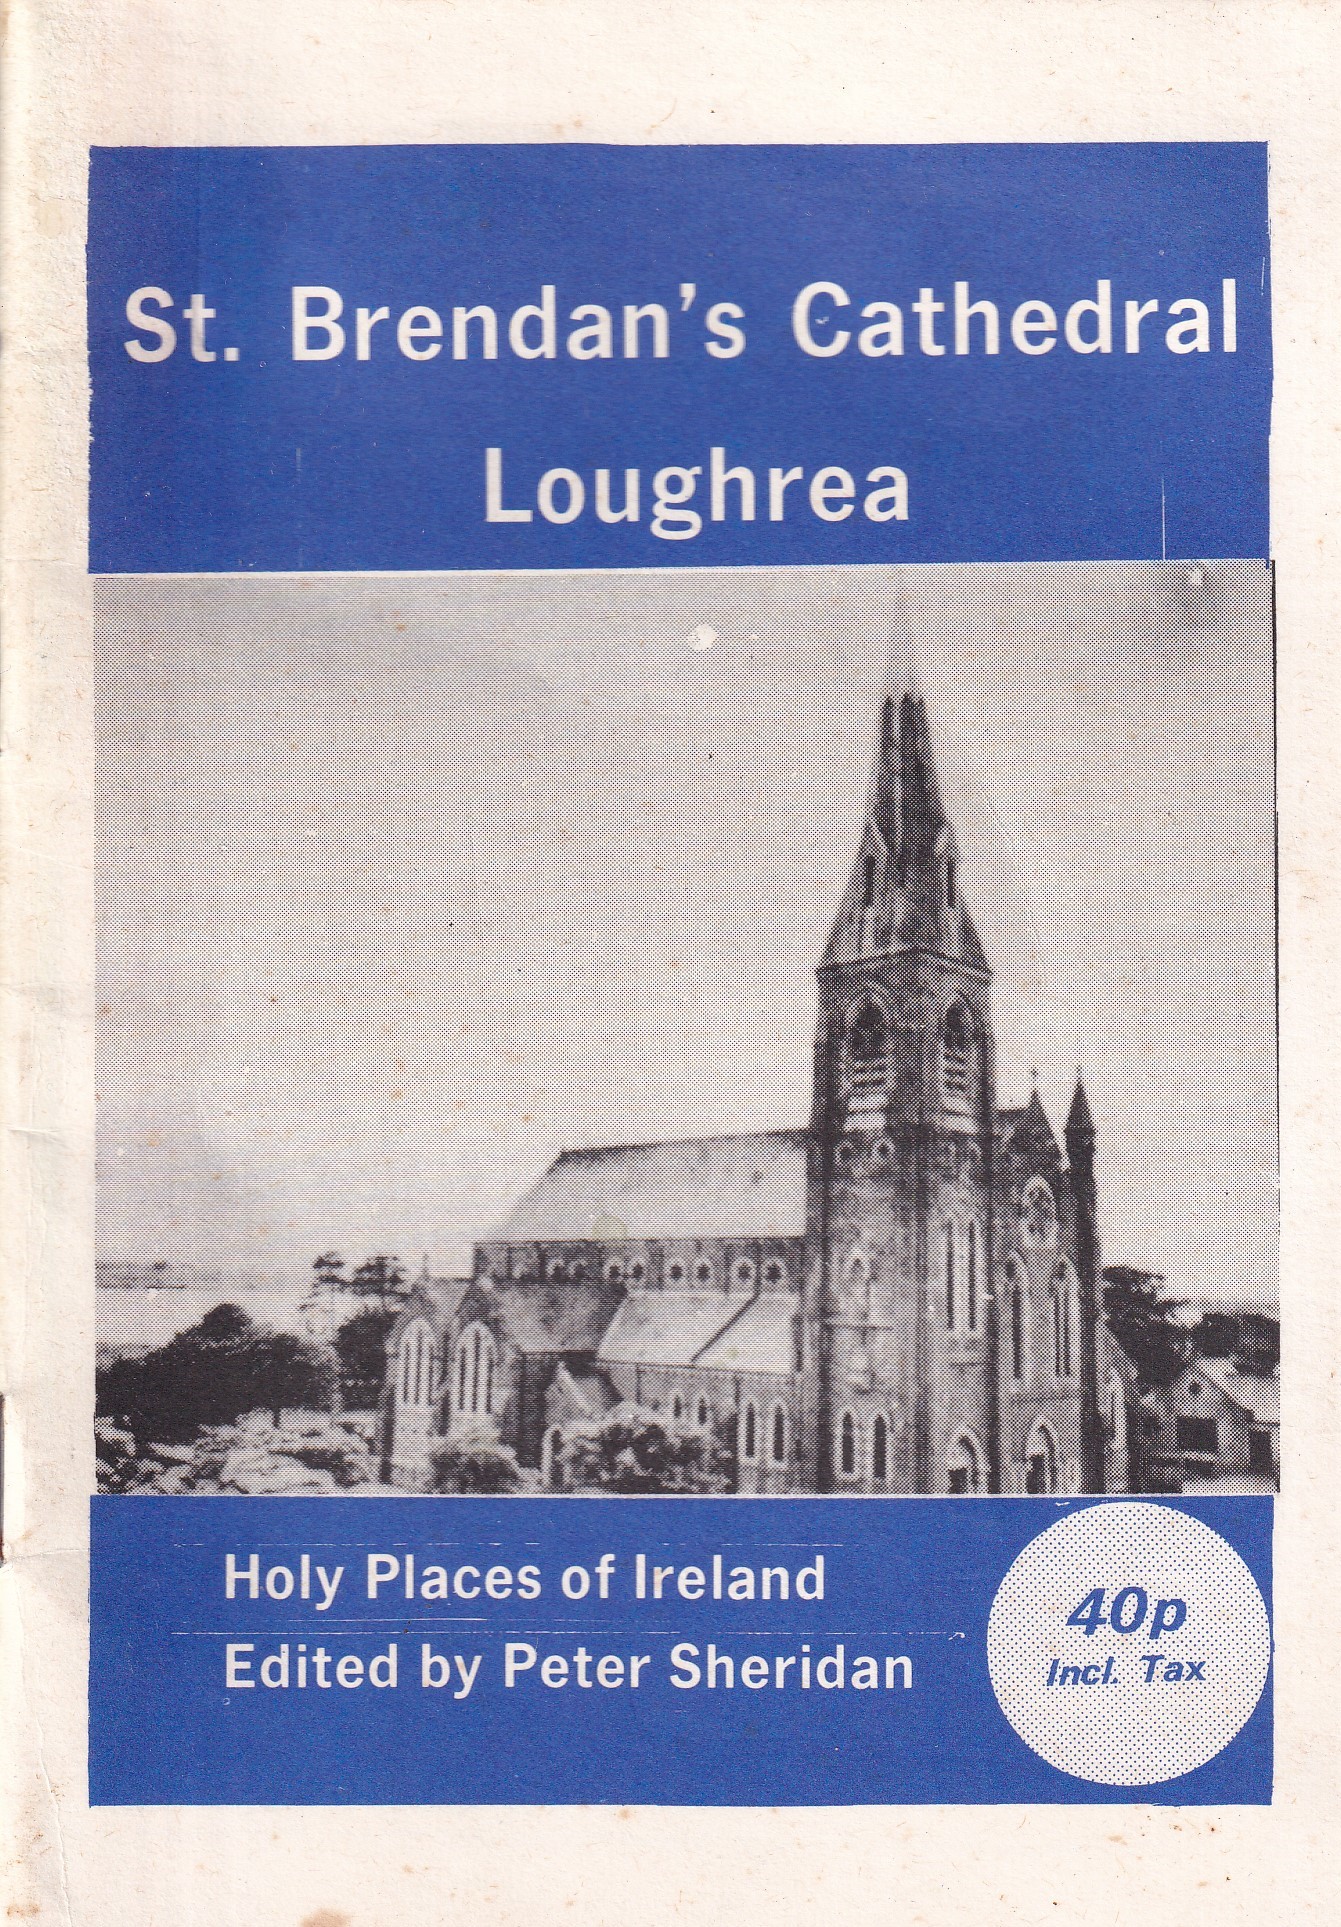 St. Brendan’s Cathedral Loughrea by Peter Sheridan (ed.)